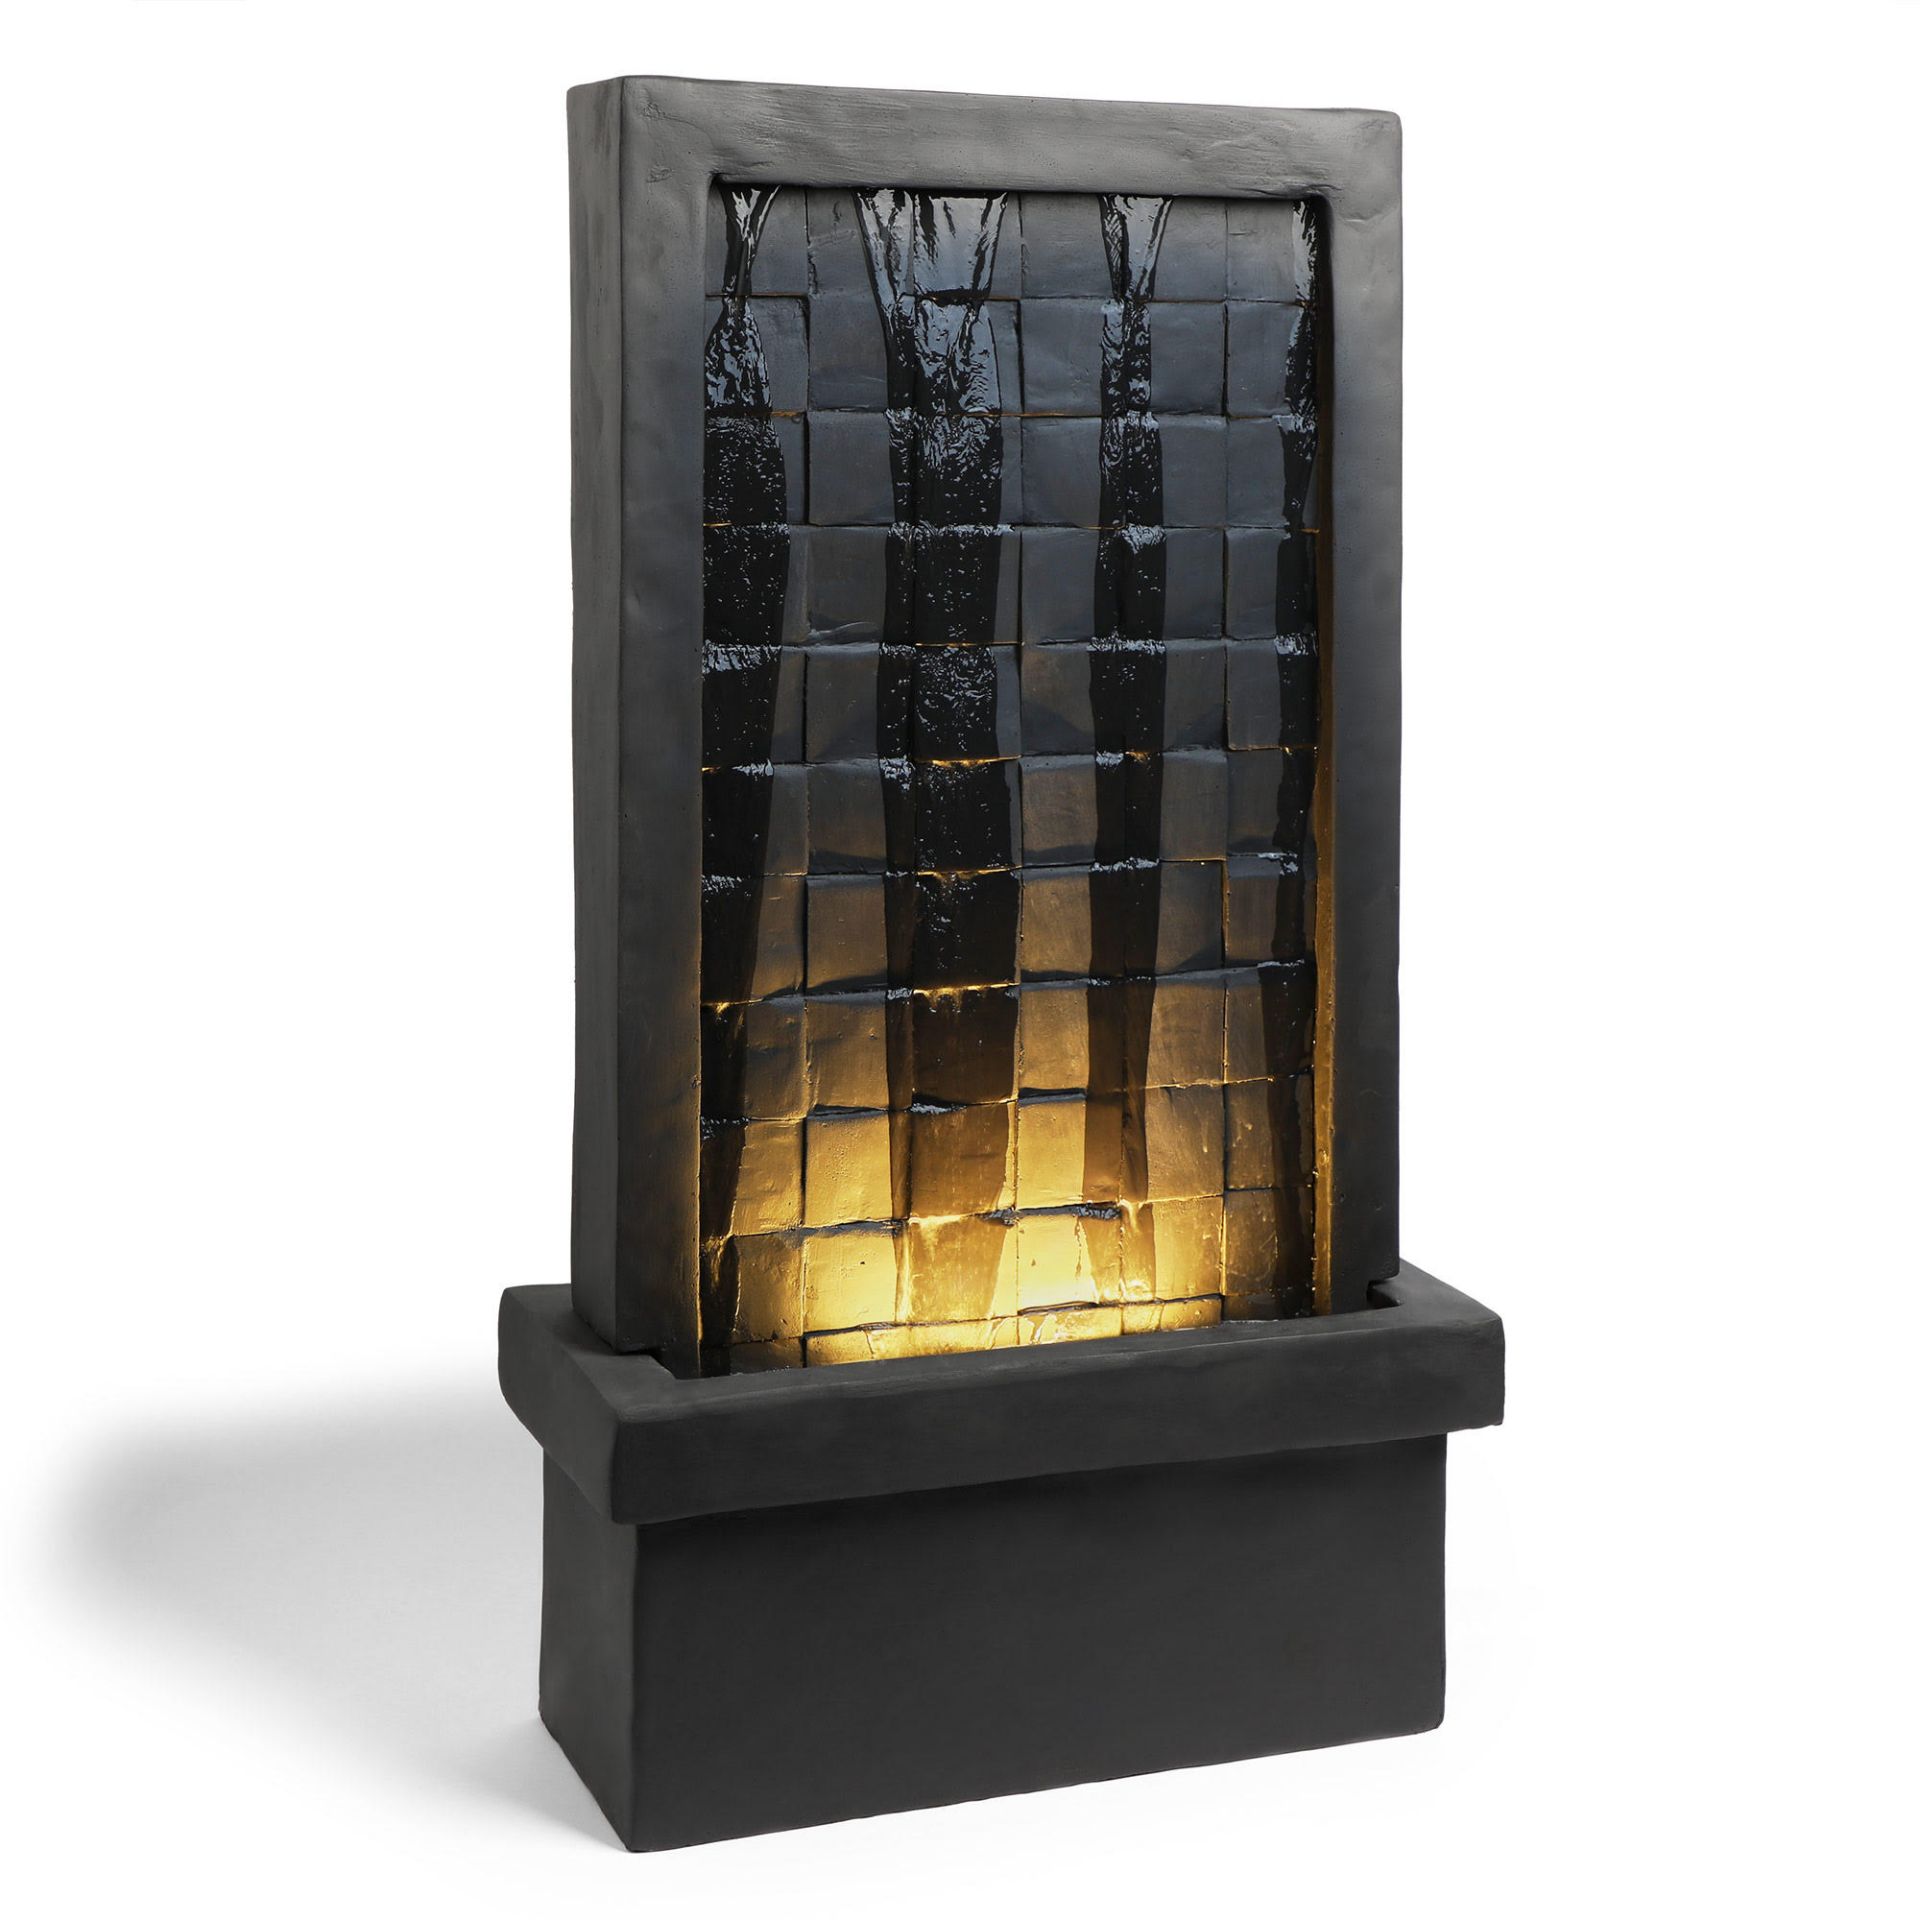 New & Boxed Tiled Waterfall Water Feature - Tall LED Wall Lit Cascading Water Fountain. RRP £349.99. - Image 6 of 6